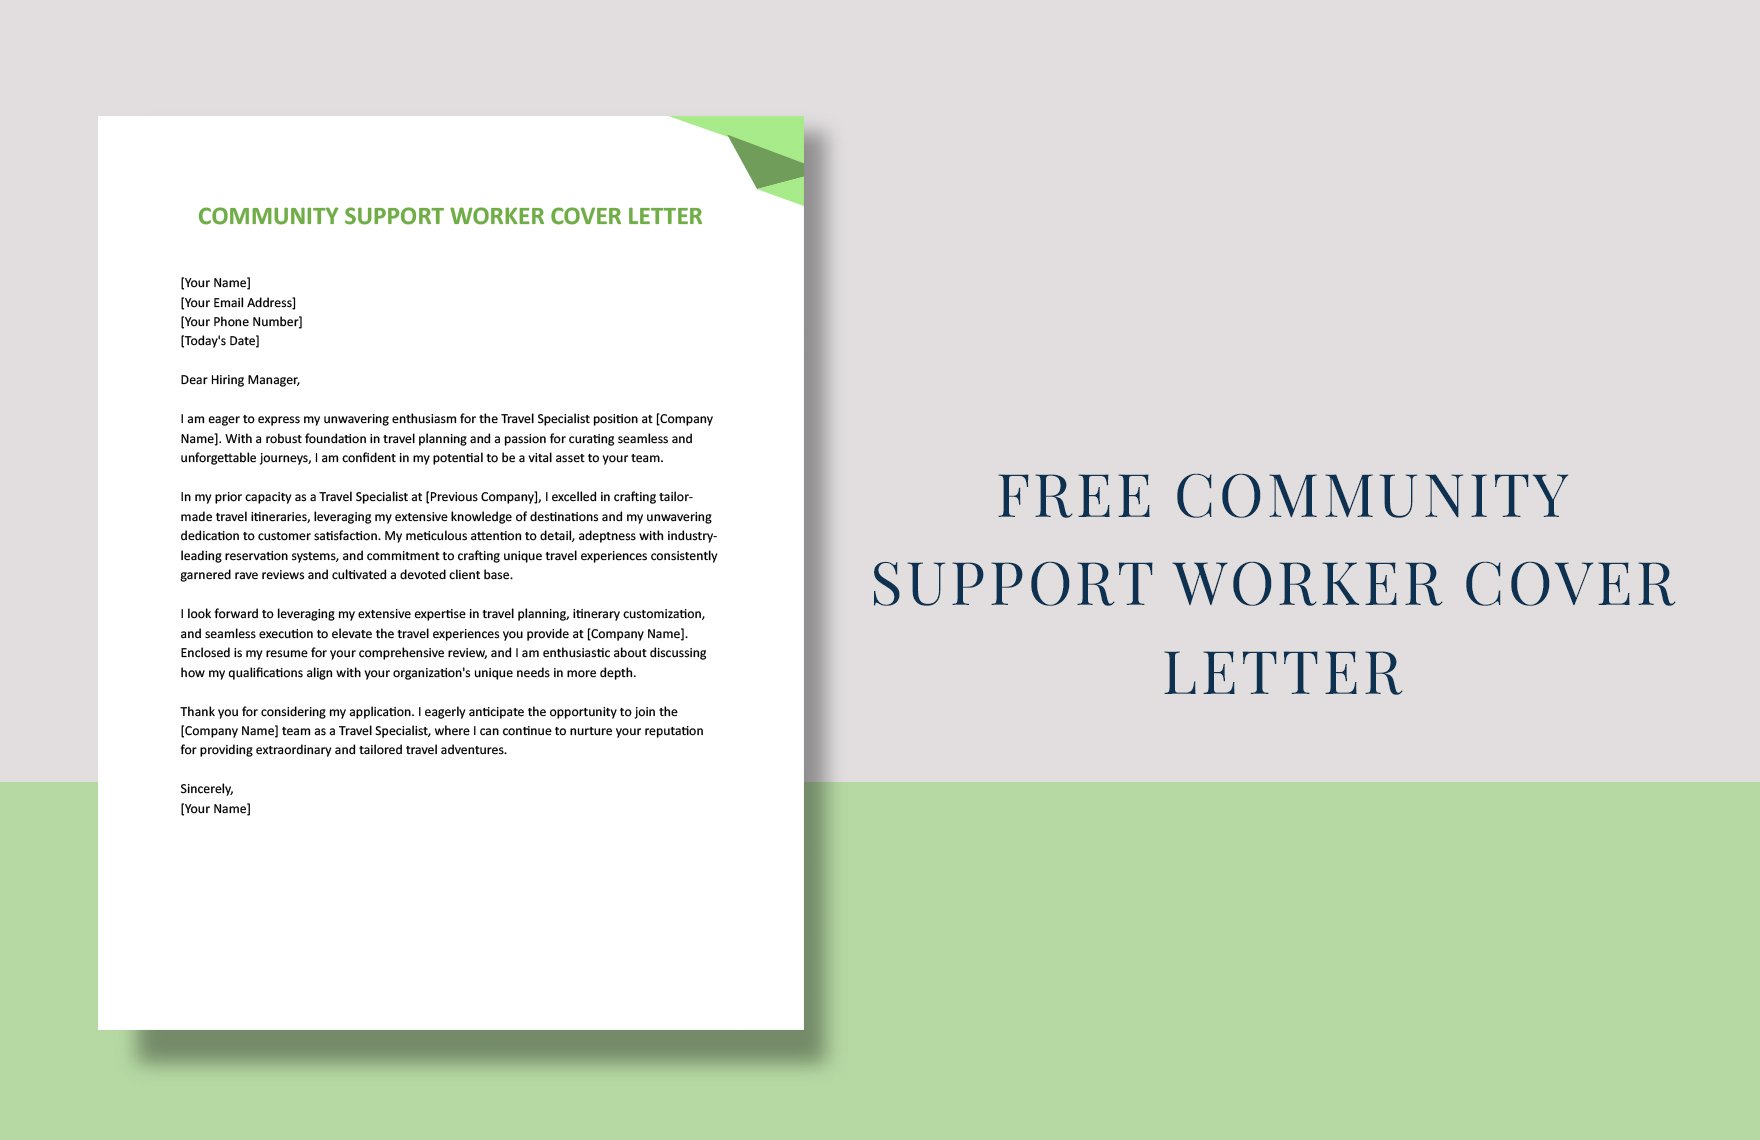 Community Support Worker Cover Letter